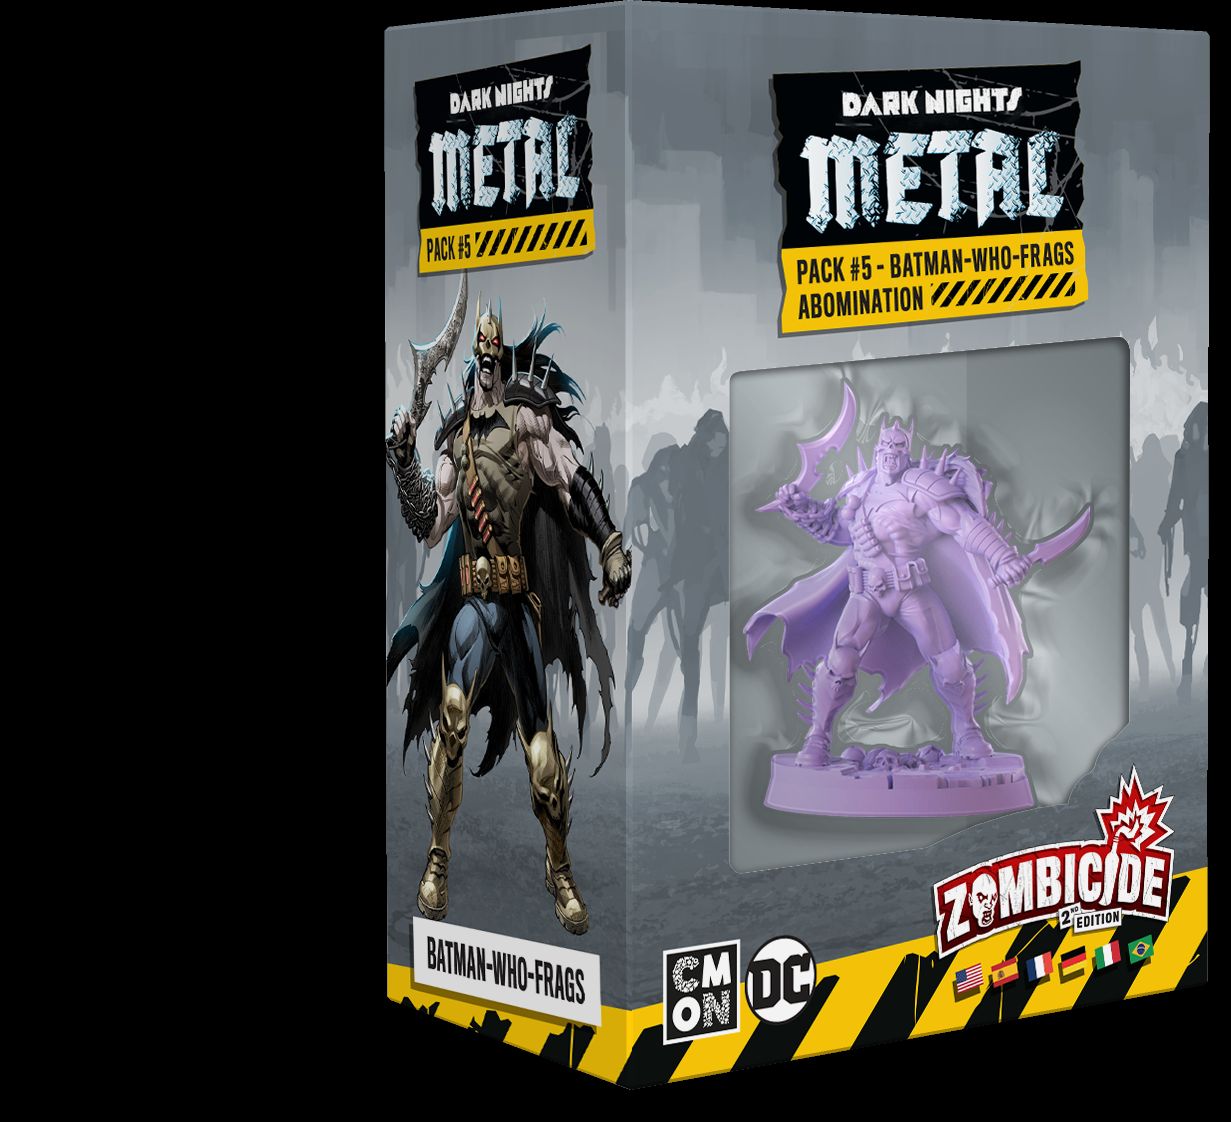 Zombicide 2nd Edition Dark Night Metal Pack 5